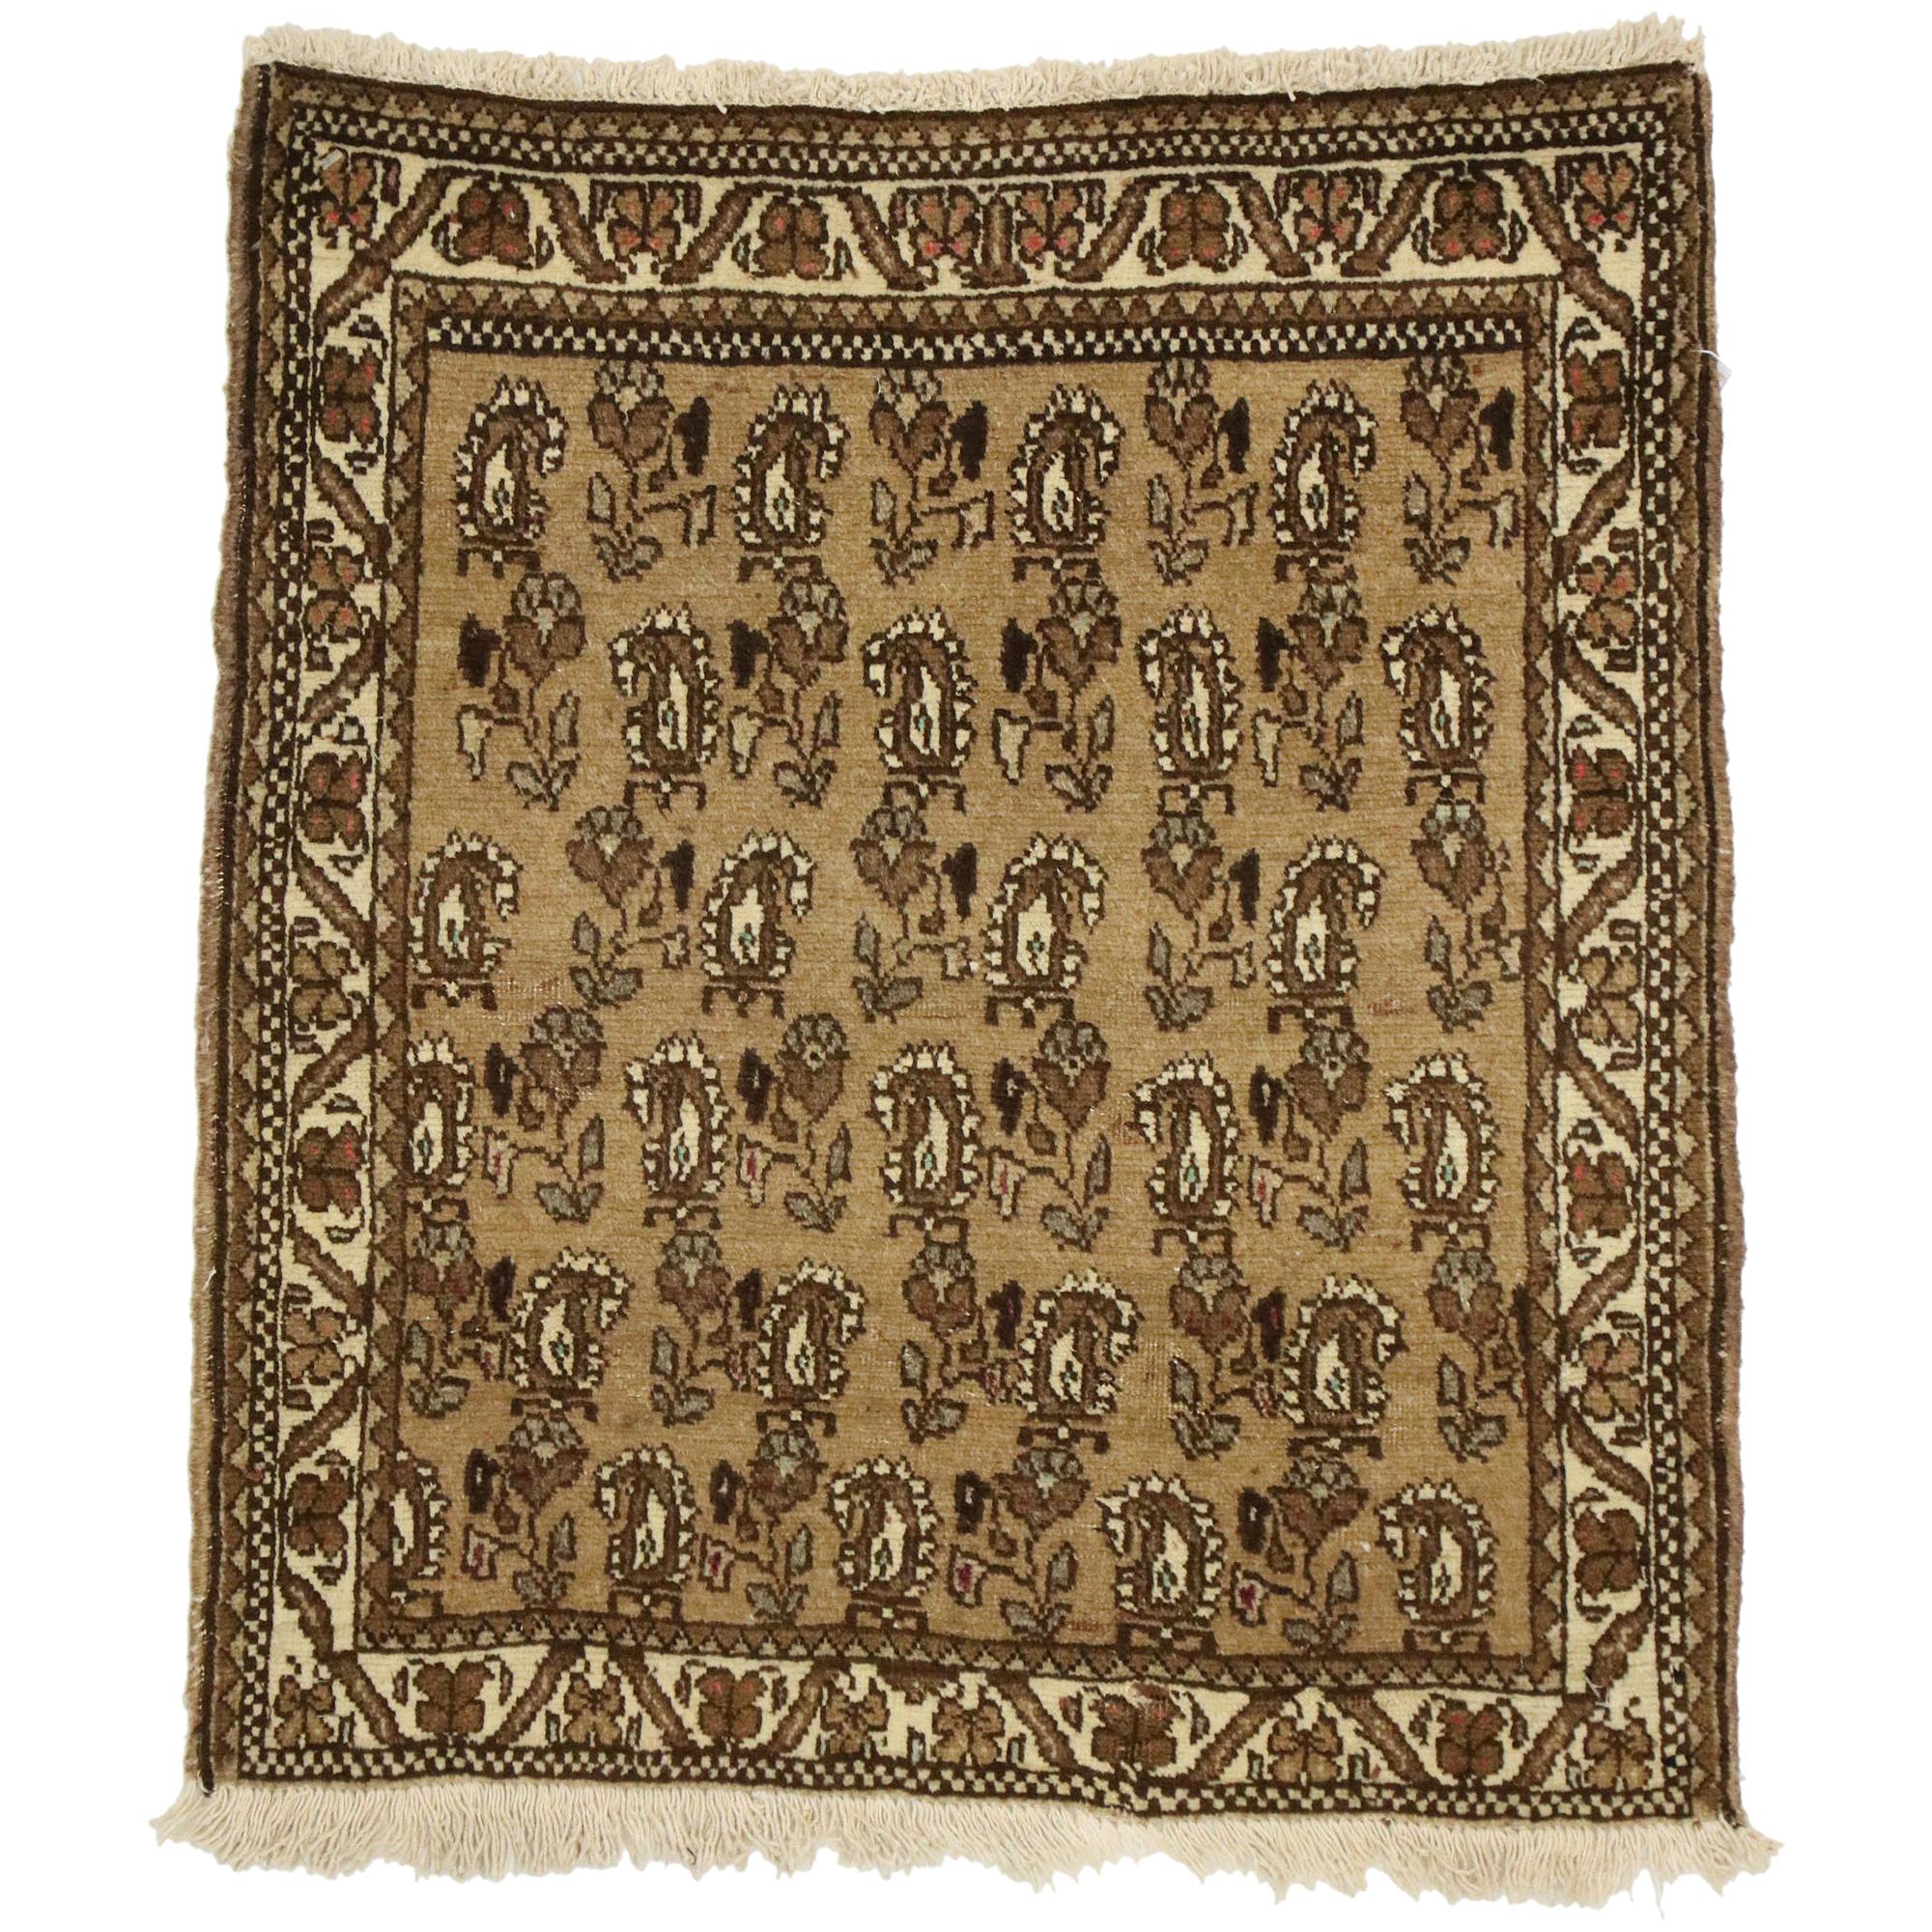 Vintage Persian Mashhad Scatter Rug with Mid-Century Modern Style